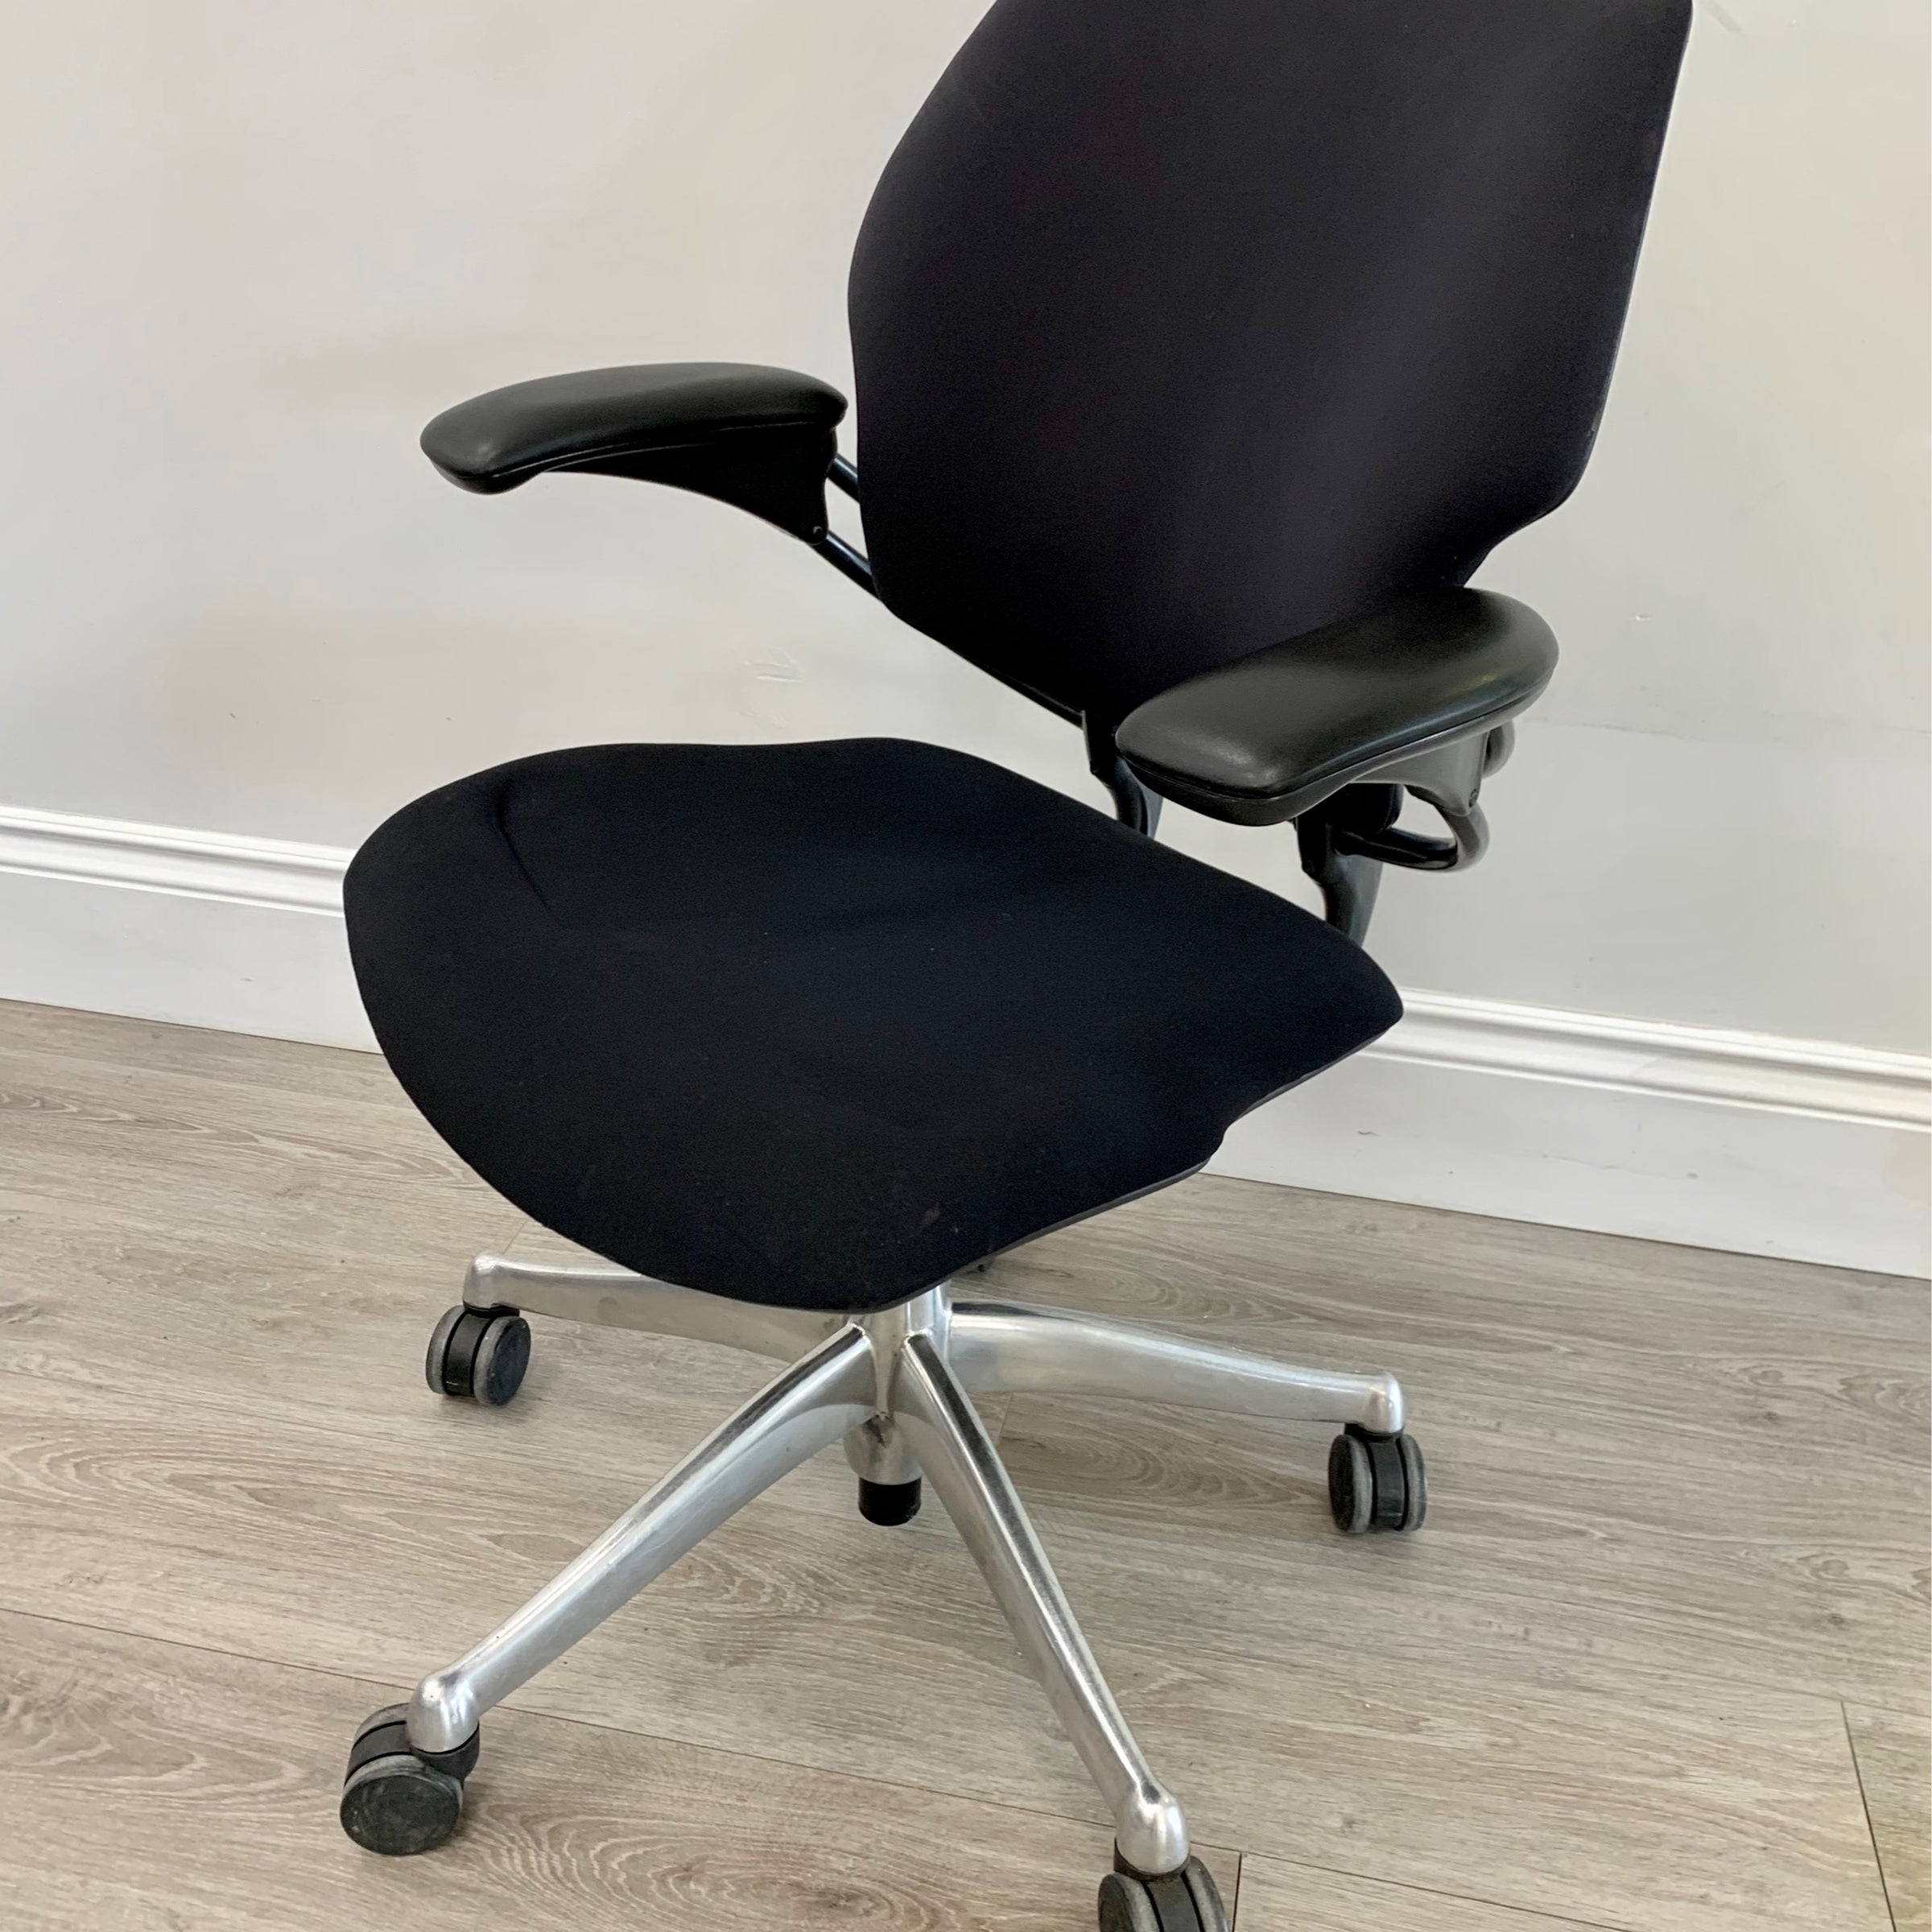 Humanscale Freedom Task Chair, Black